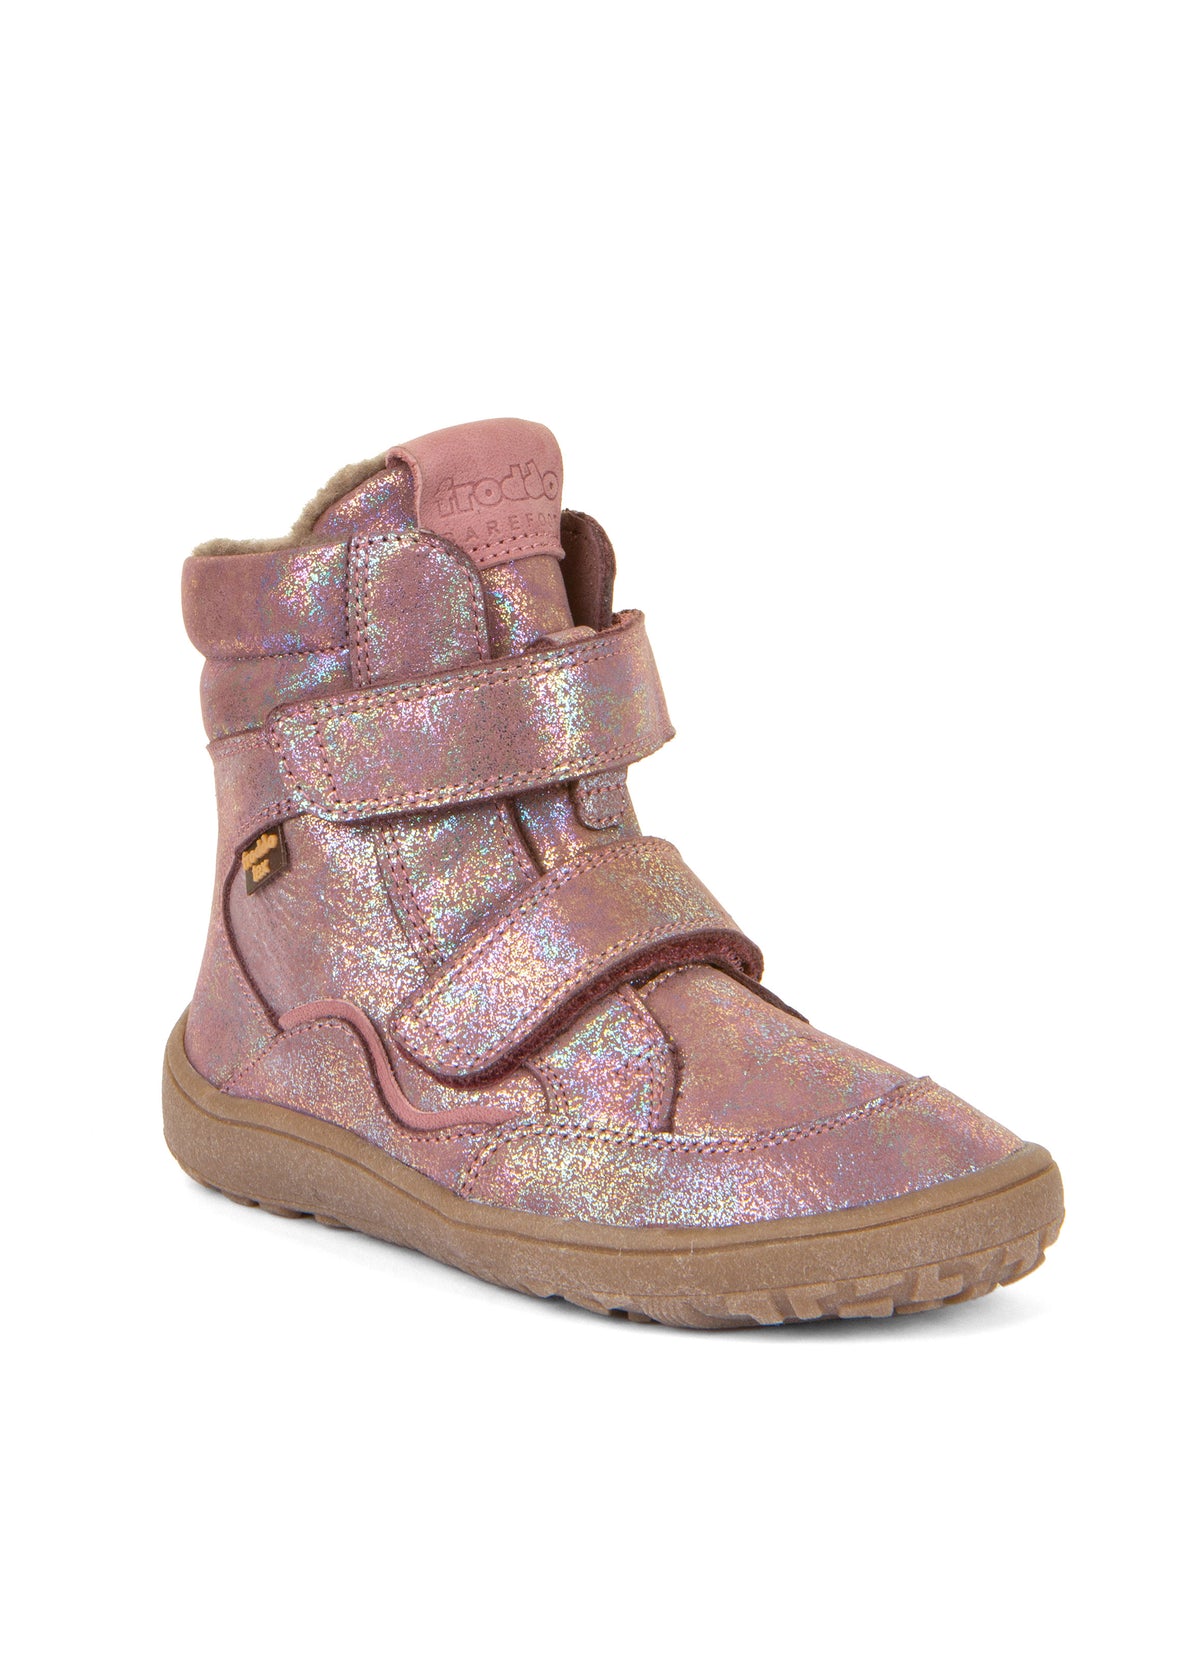 Children's barefoot shoes - leather winter shoes, TEX Winter - sparkling pink